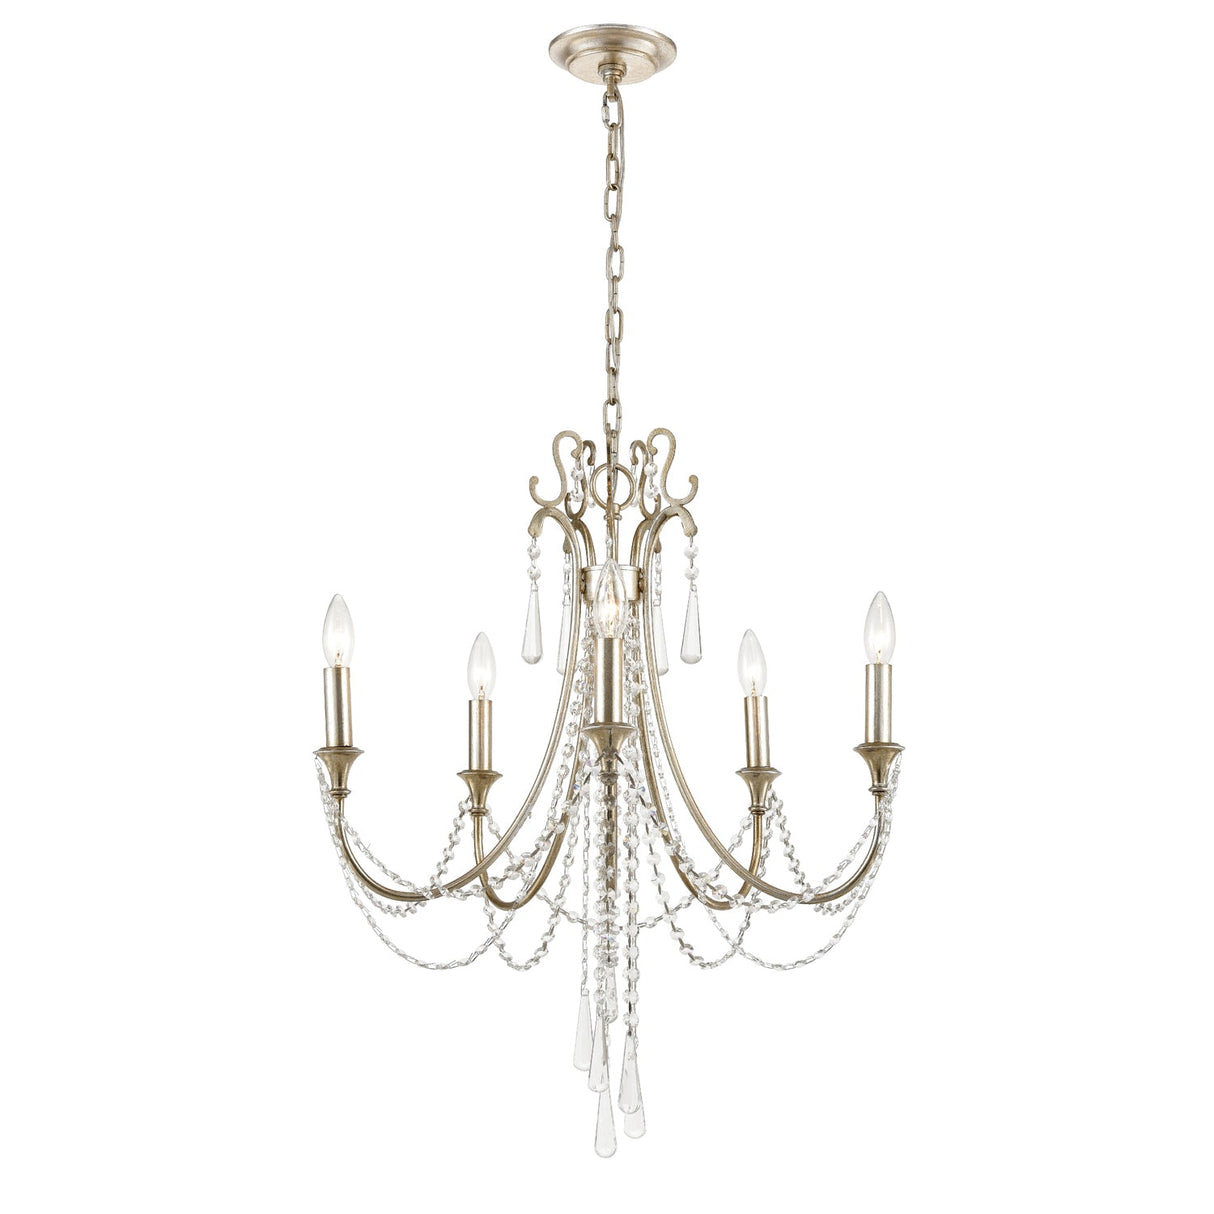 Arcadia 5 Light Antique Silver Chandelier ARC-1905-SA-CL-MWP